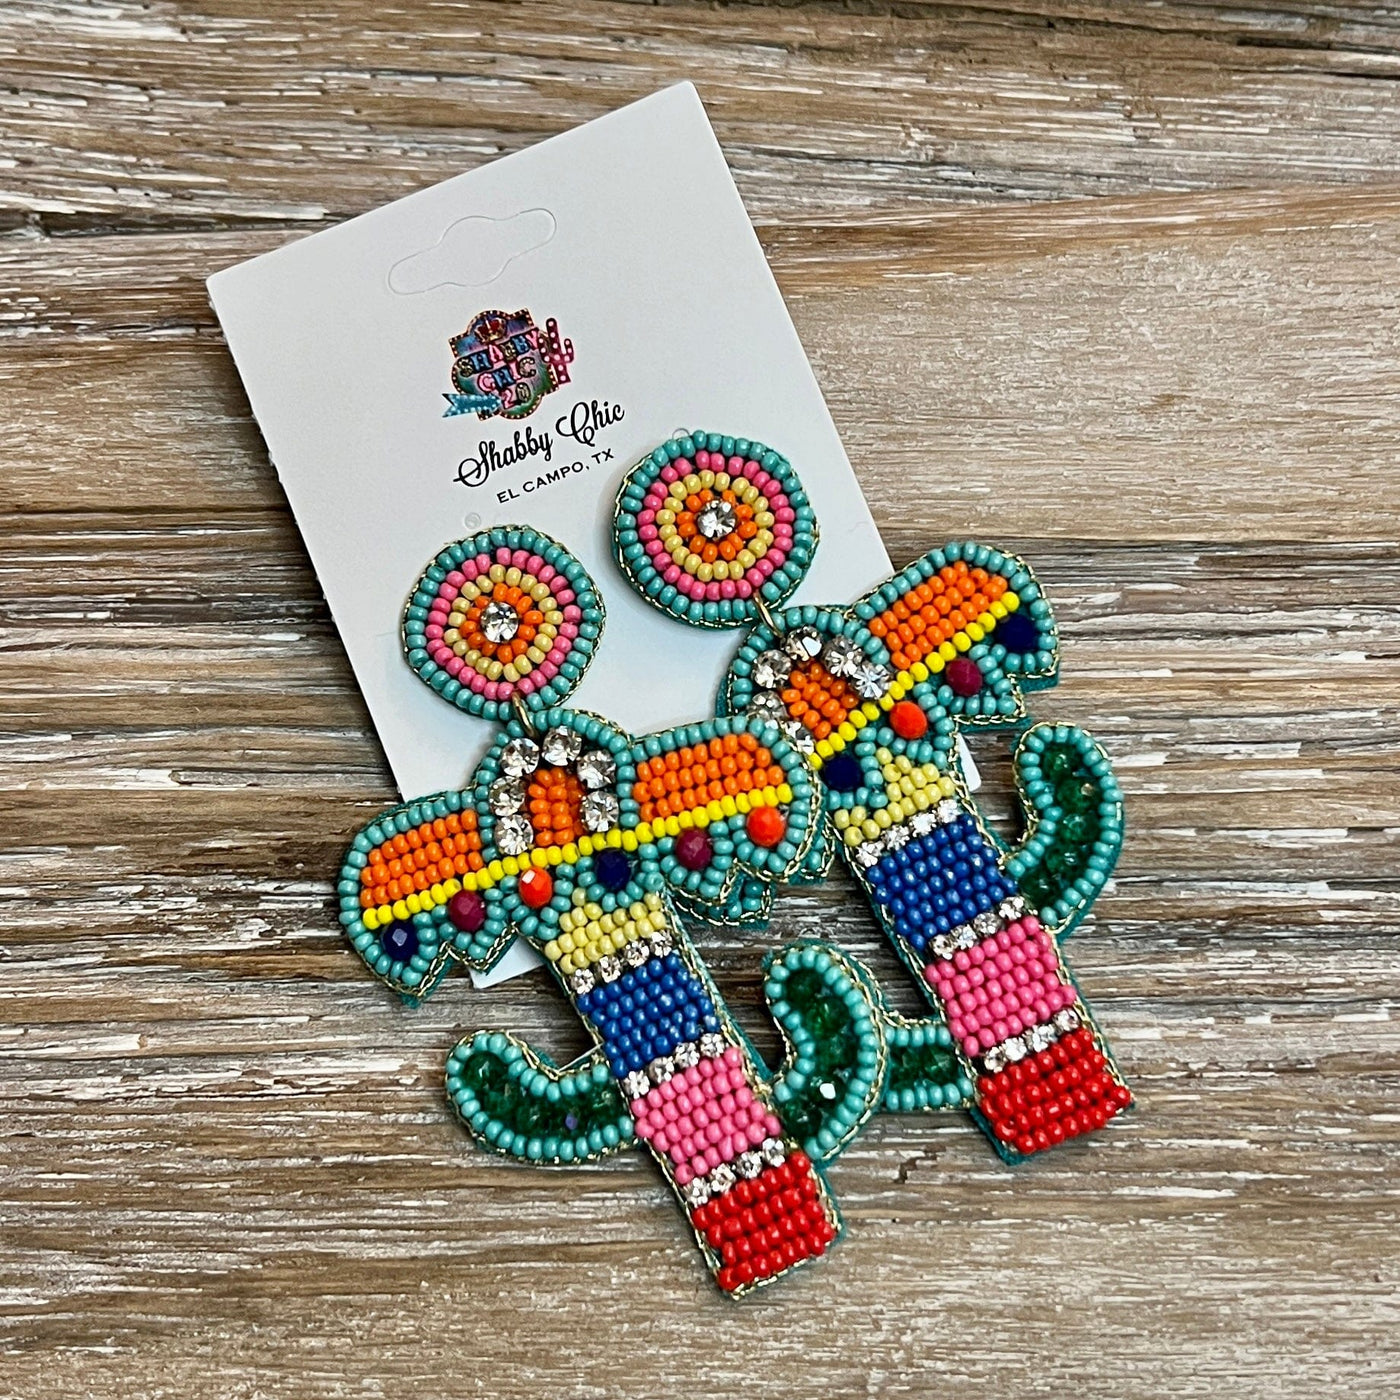 Serape Cactus Beaded Earrings Shabby Chic Boutique and Tanning Salon